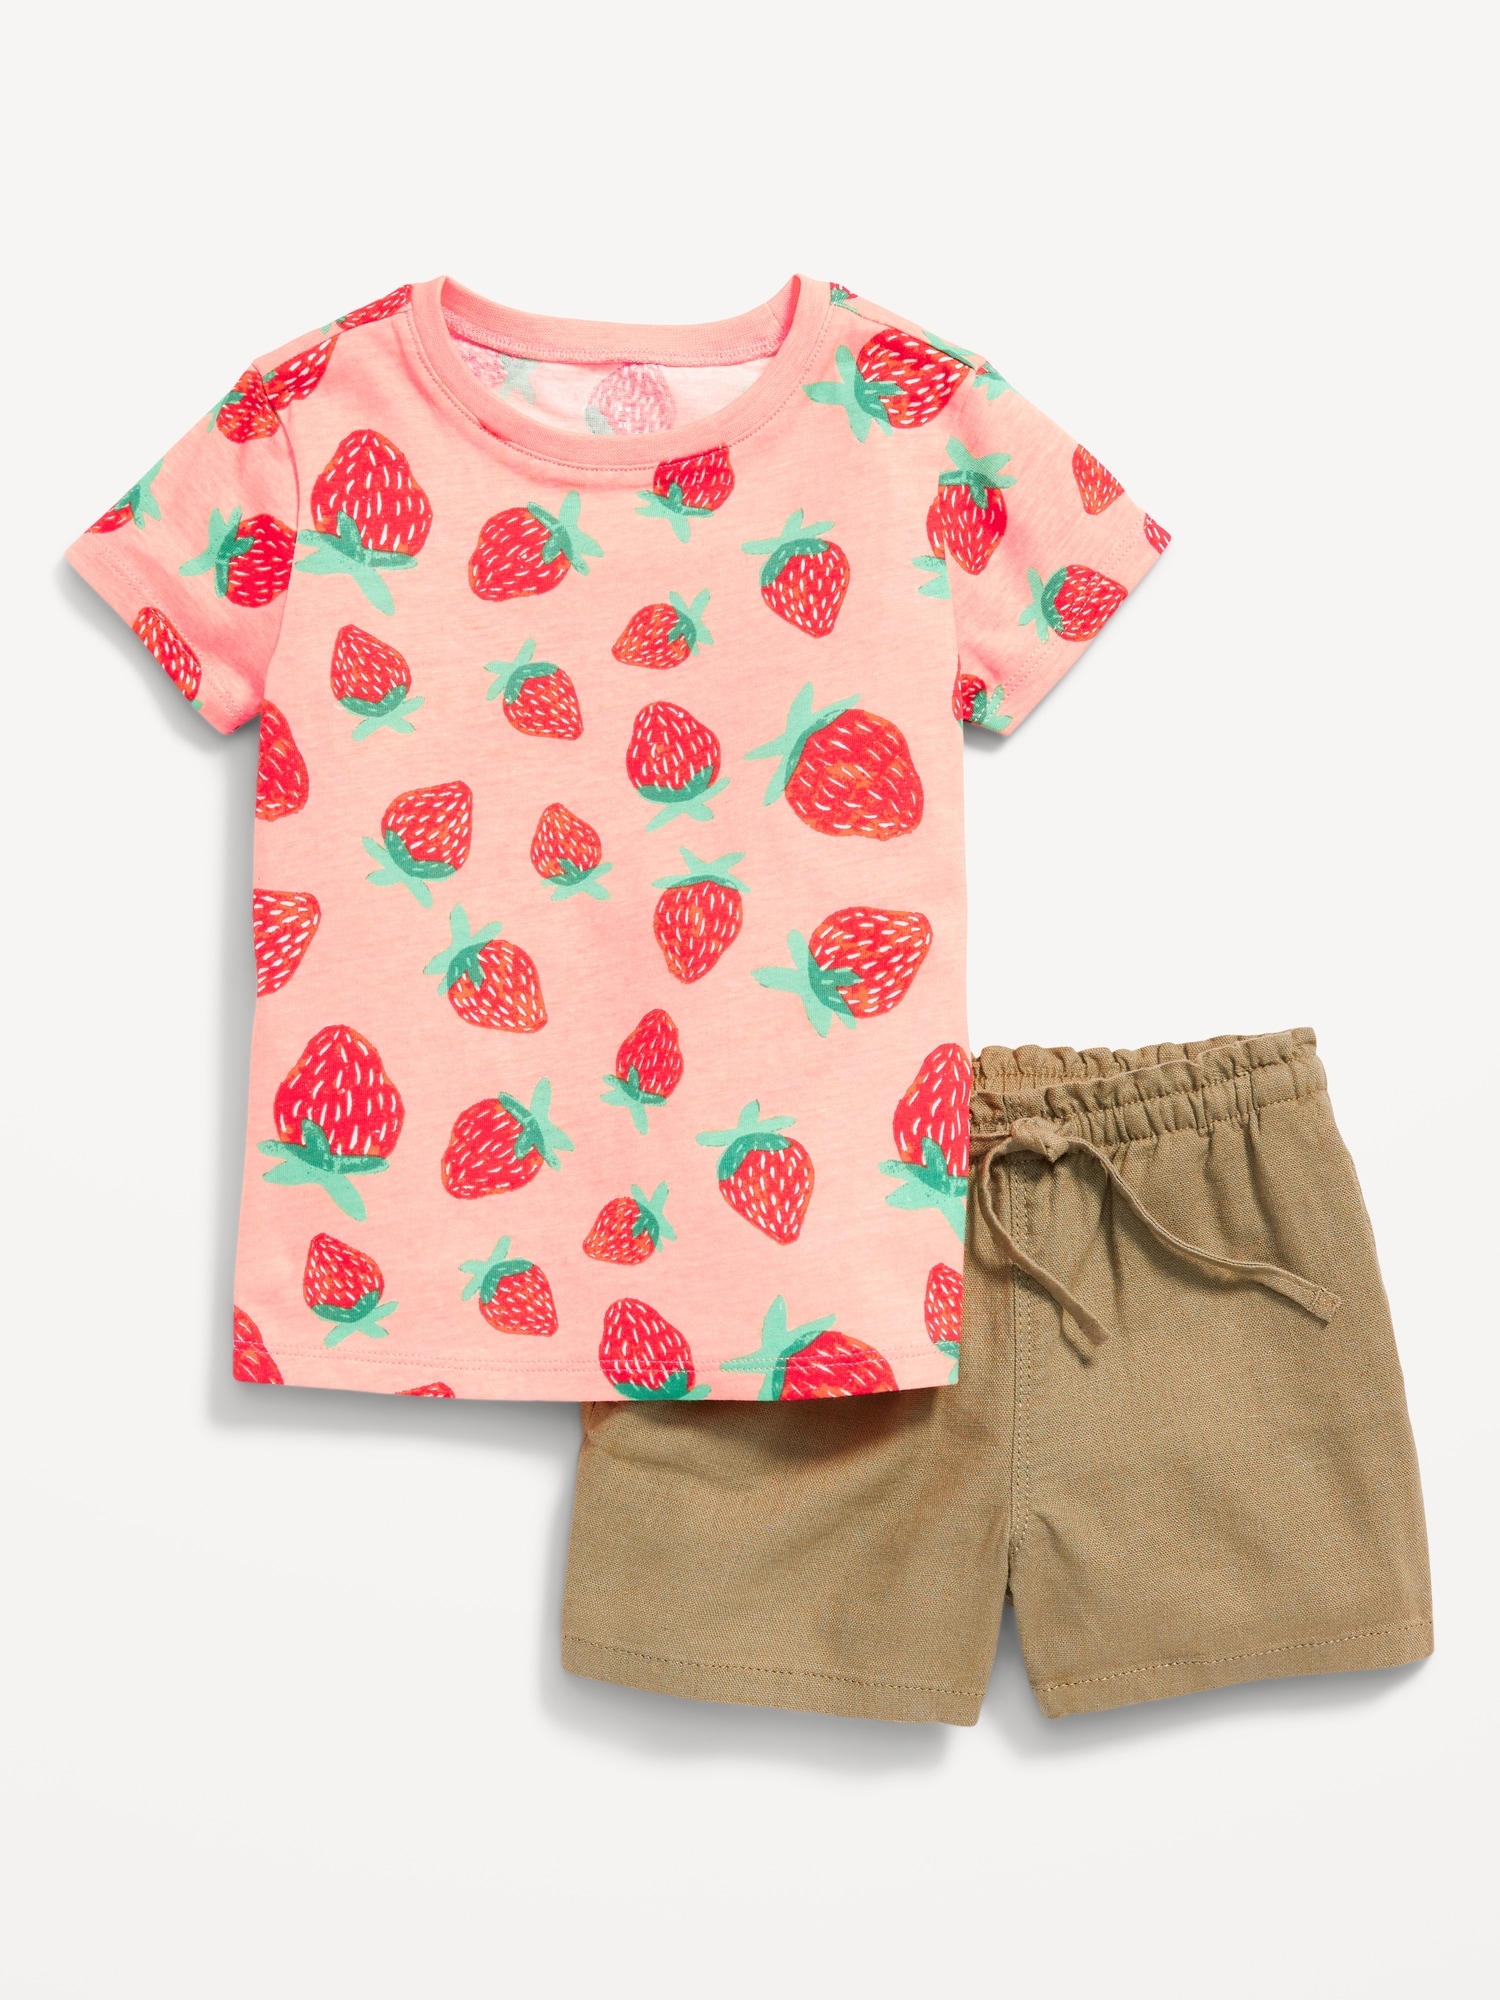 Old Navy Printed Crew-Neck T-Shirt & Pull-On Shorts for Toddler Girls pink. 1